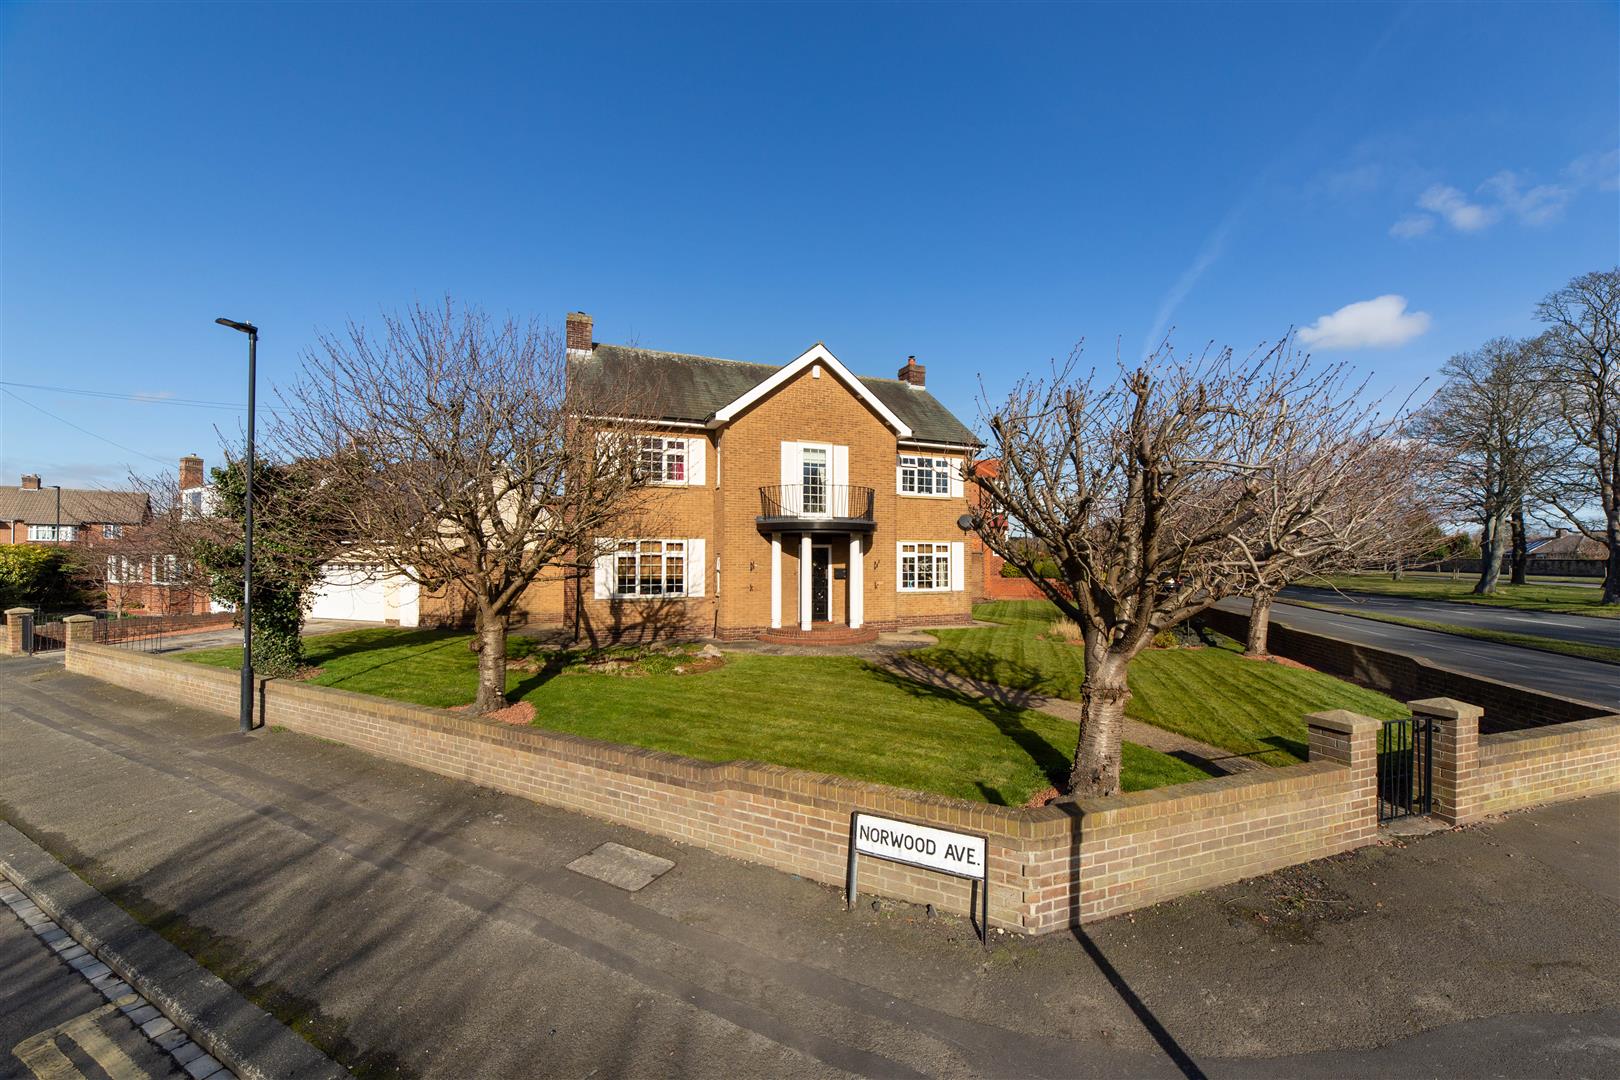 4 bed detached house for sale in Norwood Avenue, Gosforth, NE3 